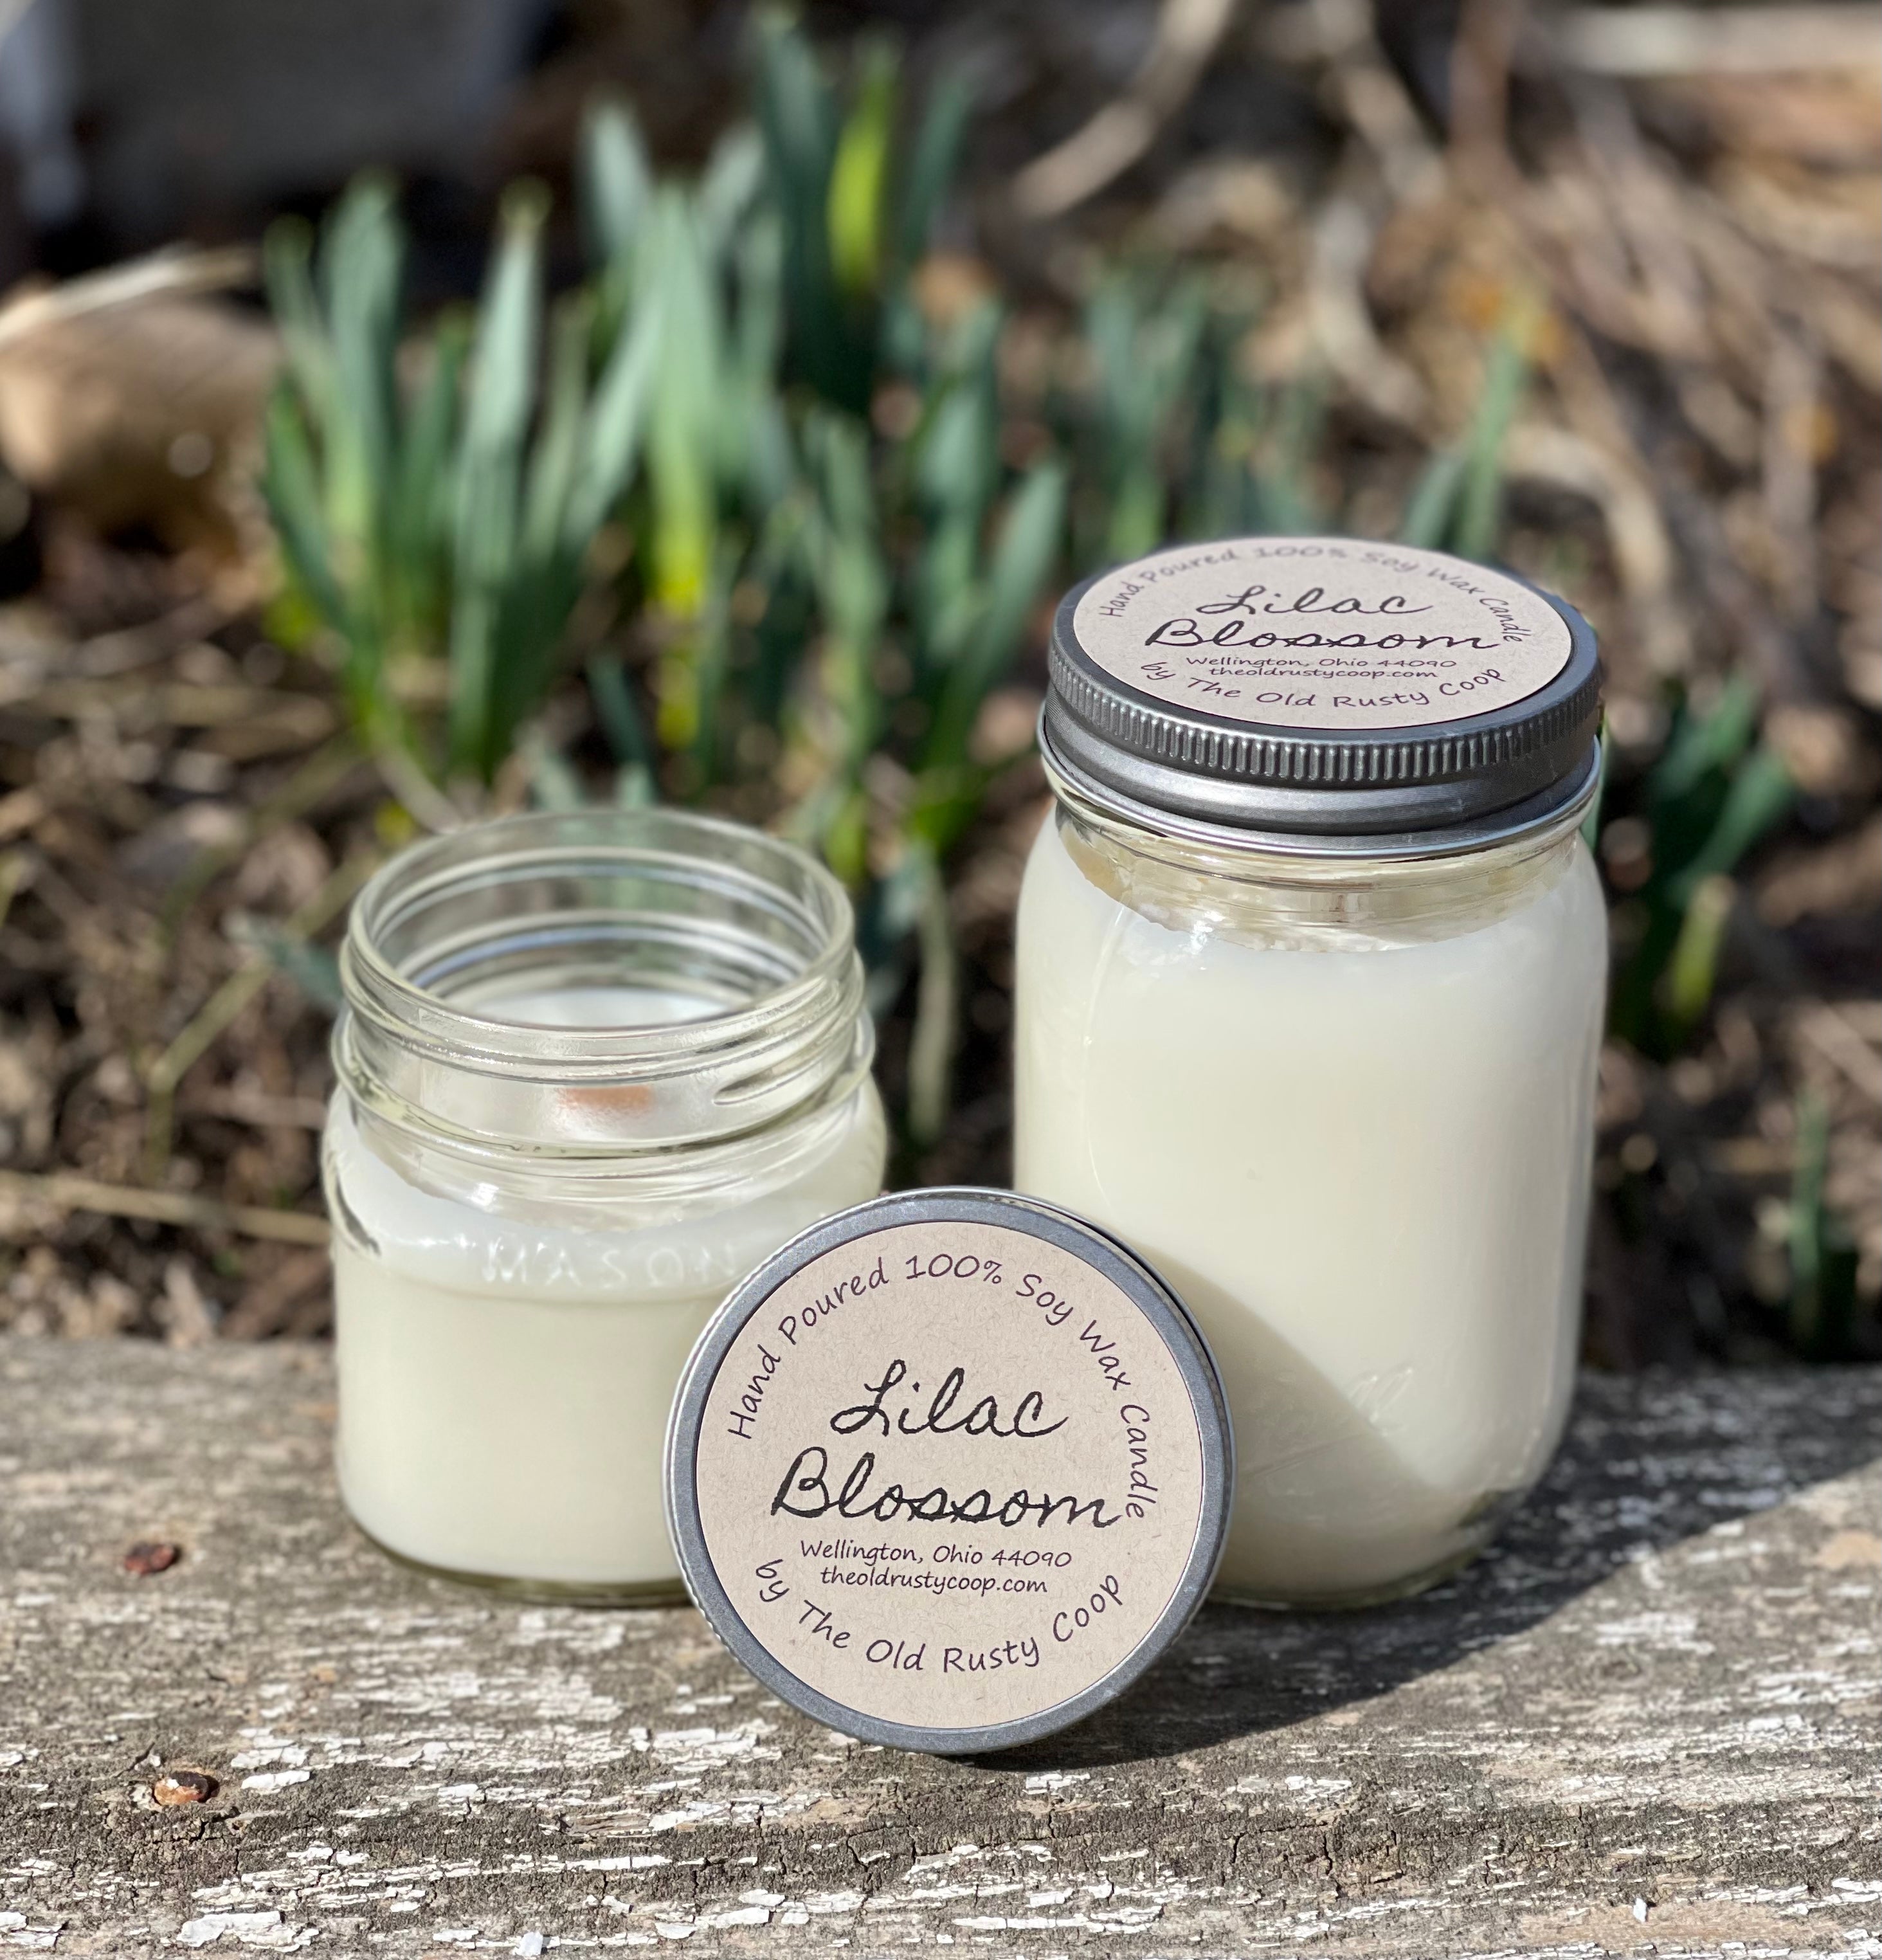 Lilac Blossoms scented 12 oz. soy candle in upcycled wine bottle